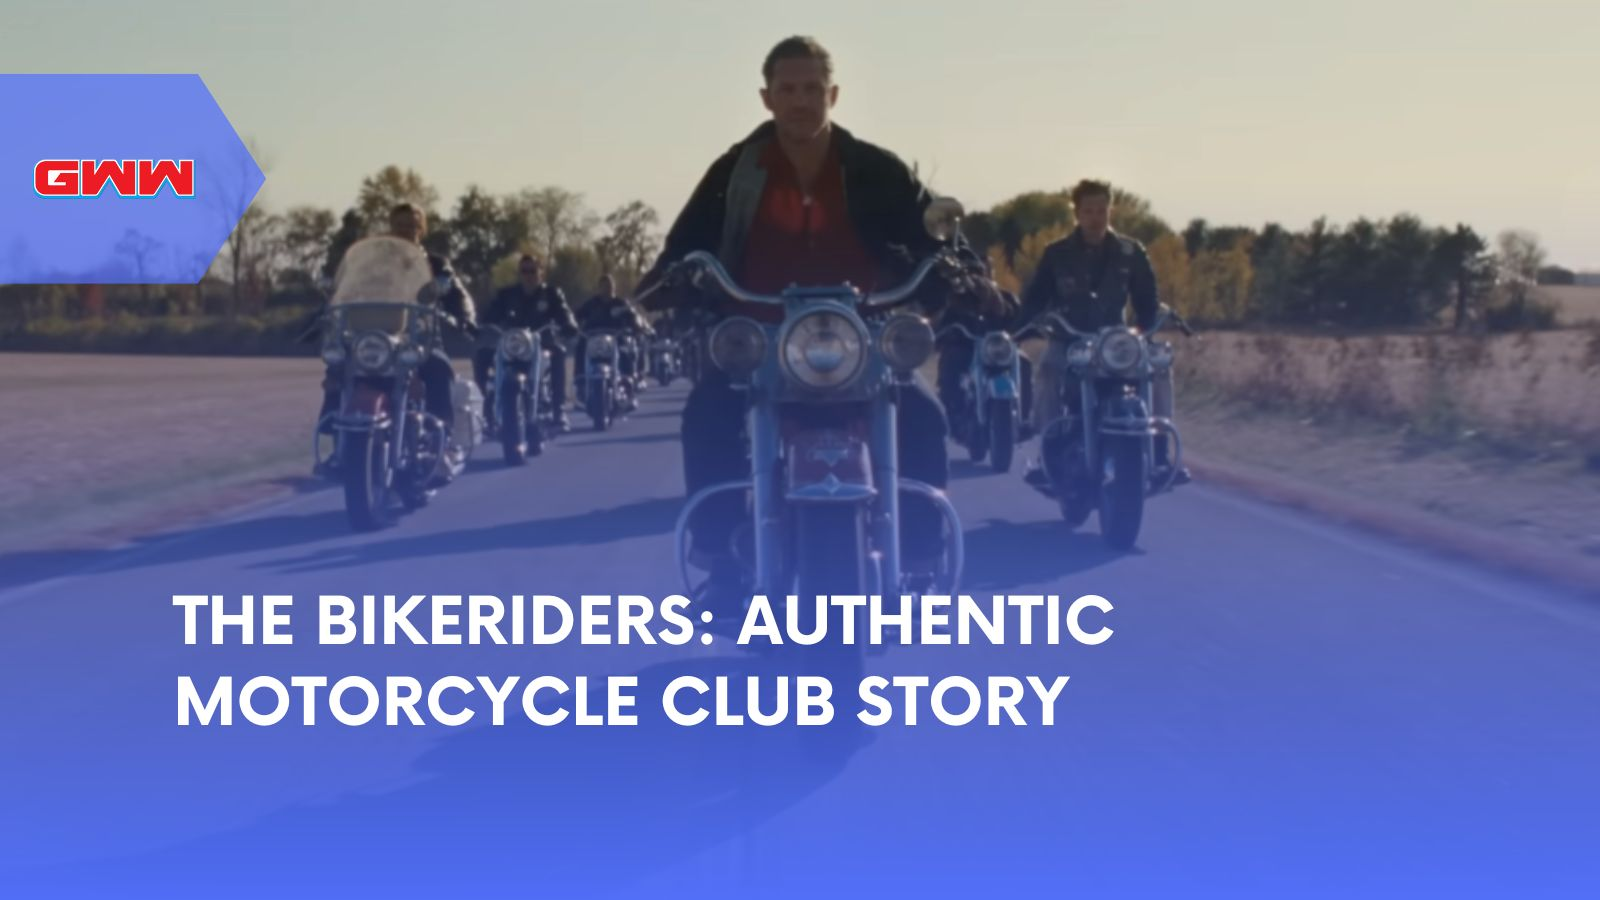 The Bikeriders: Authentic Motorcycle Club Story